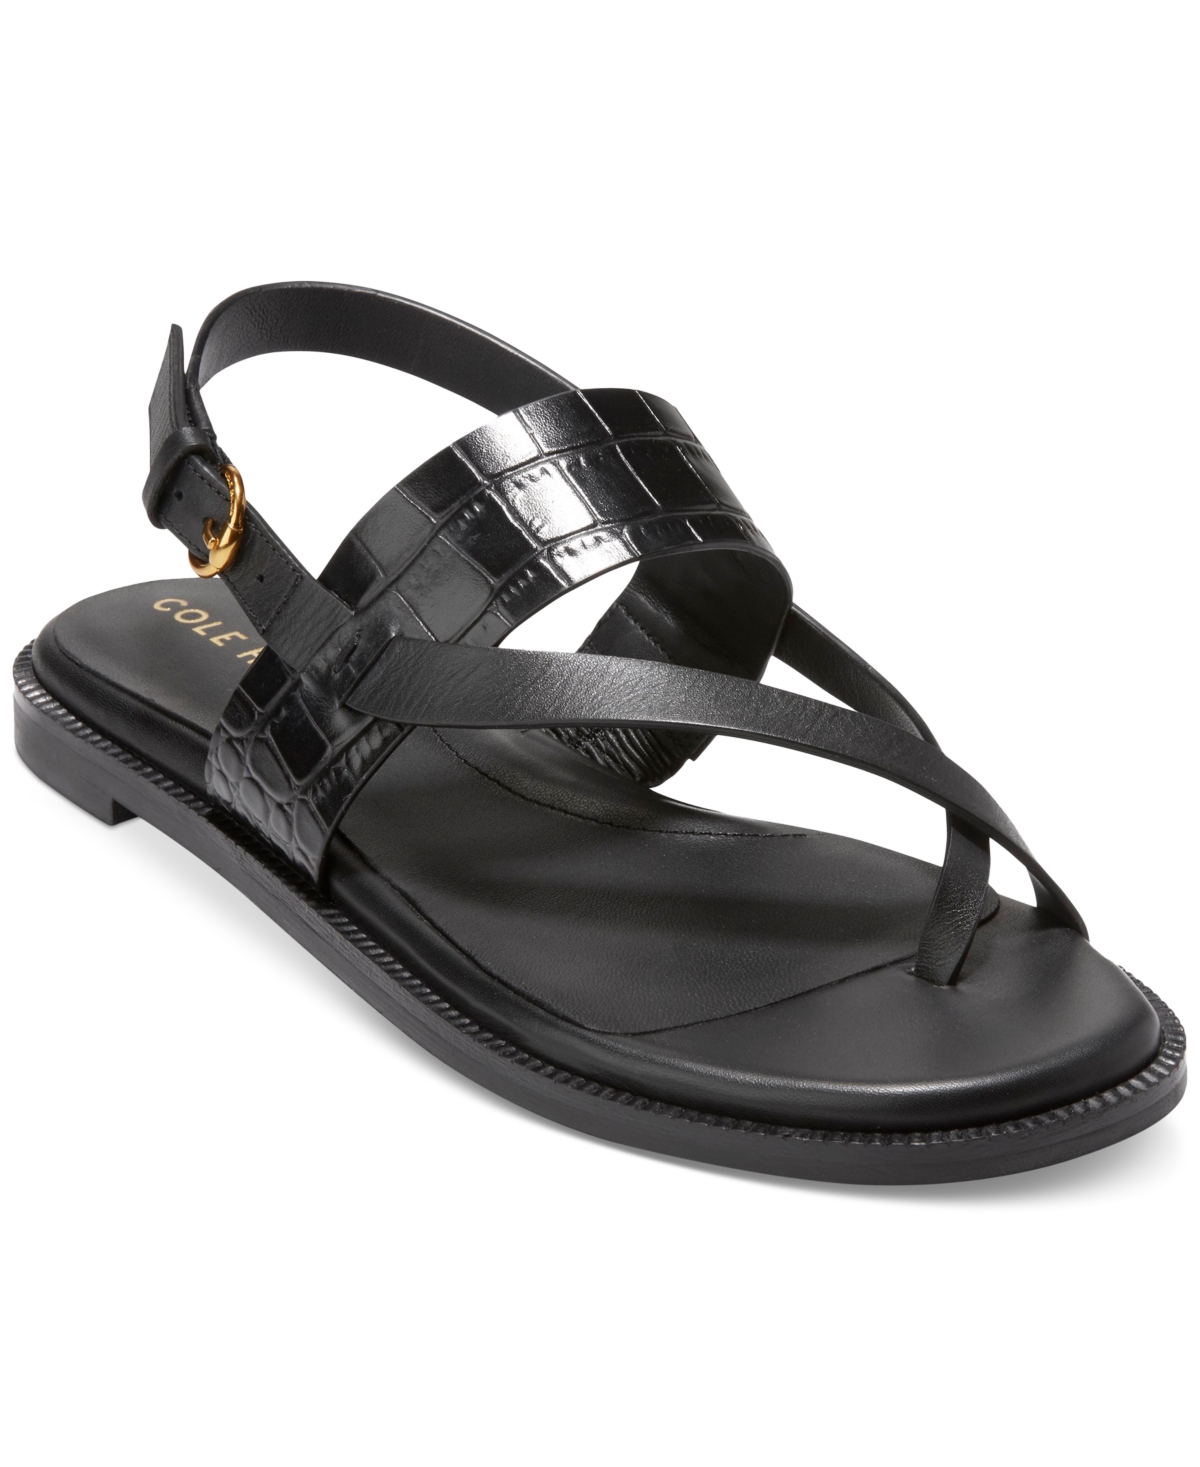 COLE HAAN WOMEN'S ANICA LUX SLINGBACK SANDALS